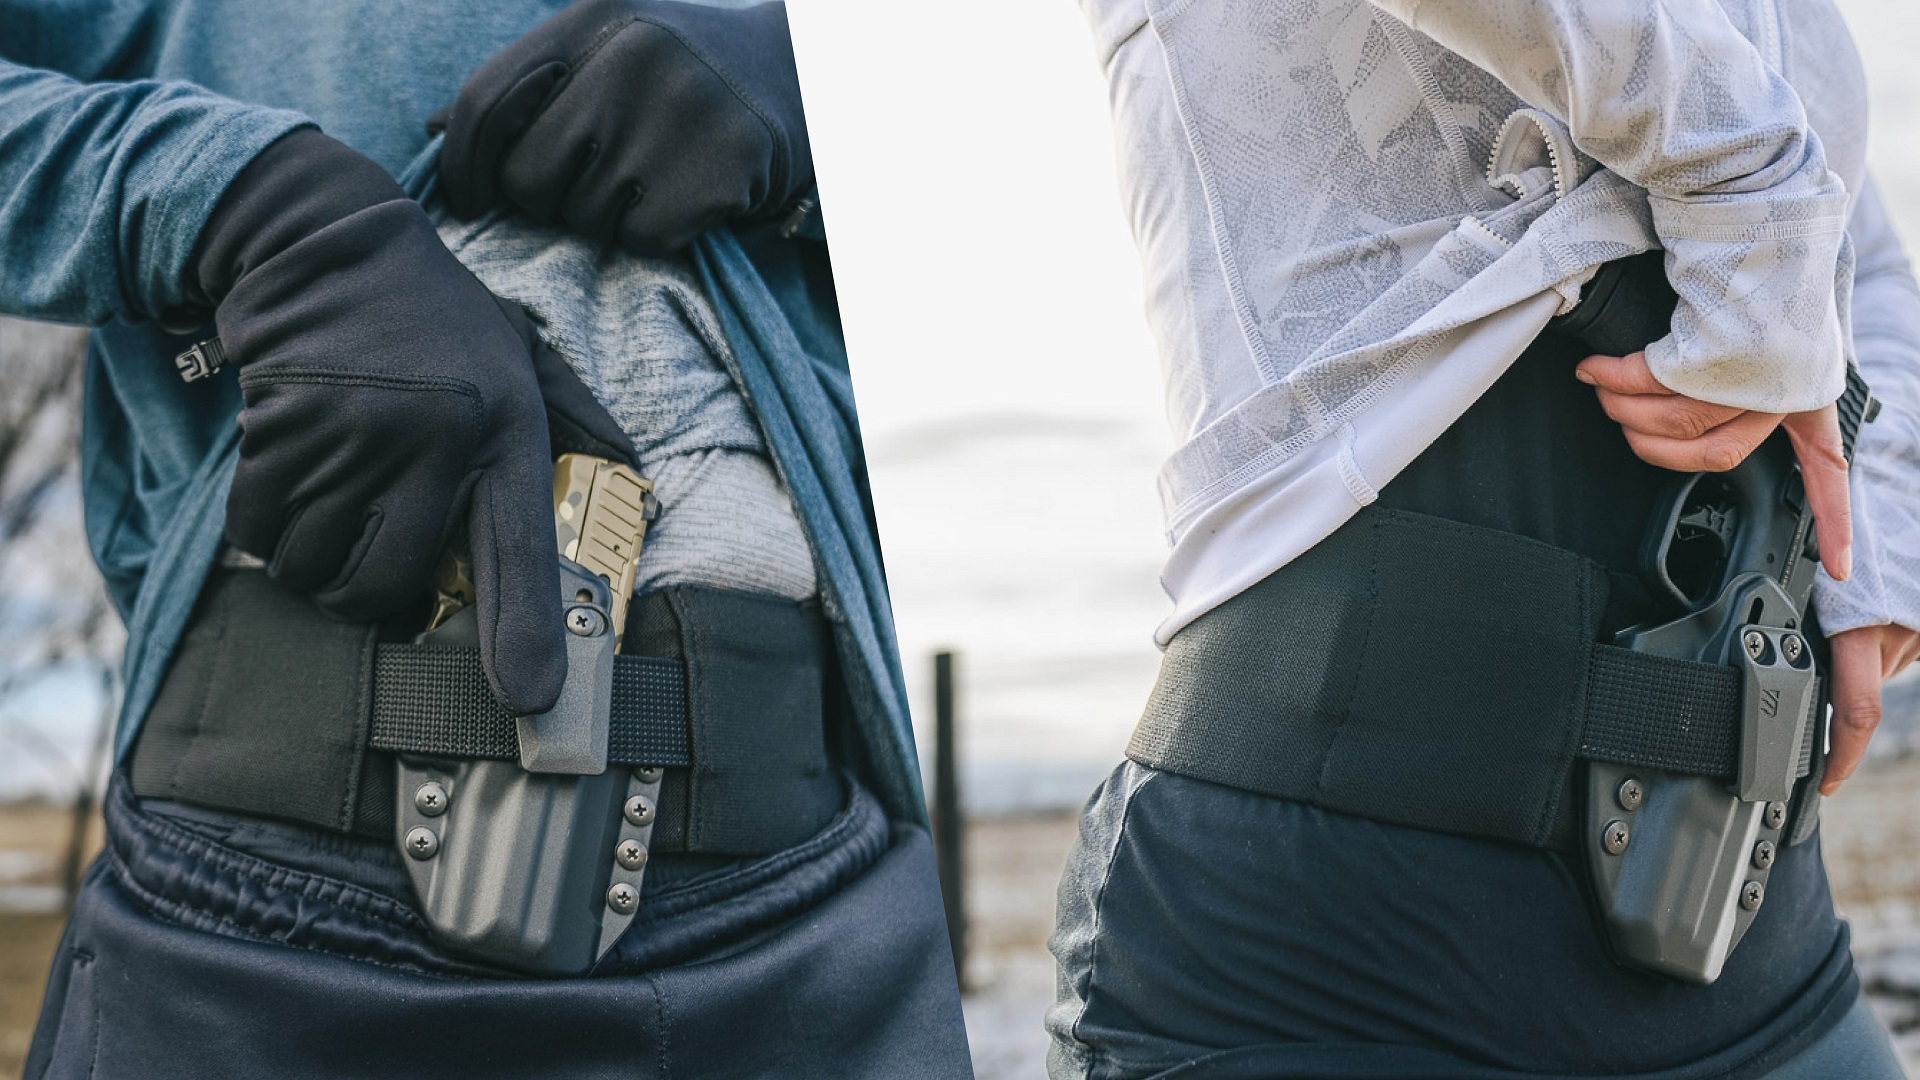 II. Factors to Consider When Choosing a Holster for Different Clothing Types